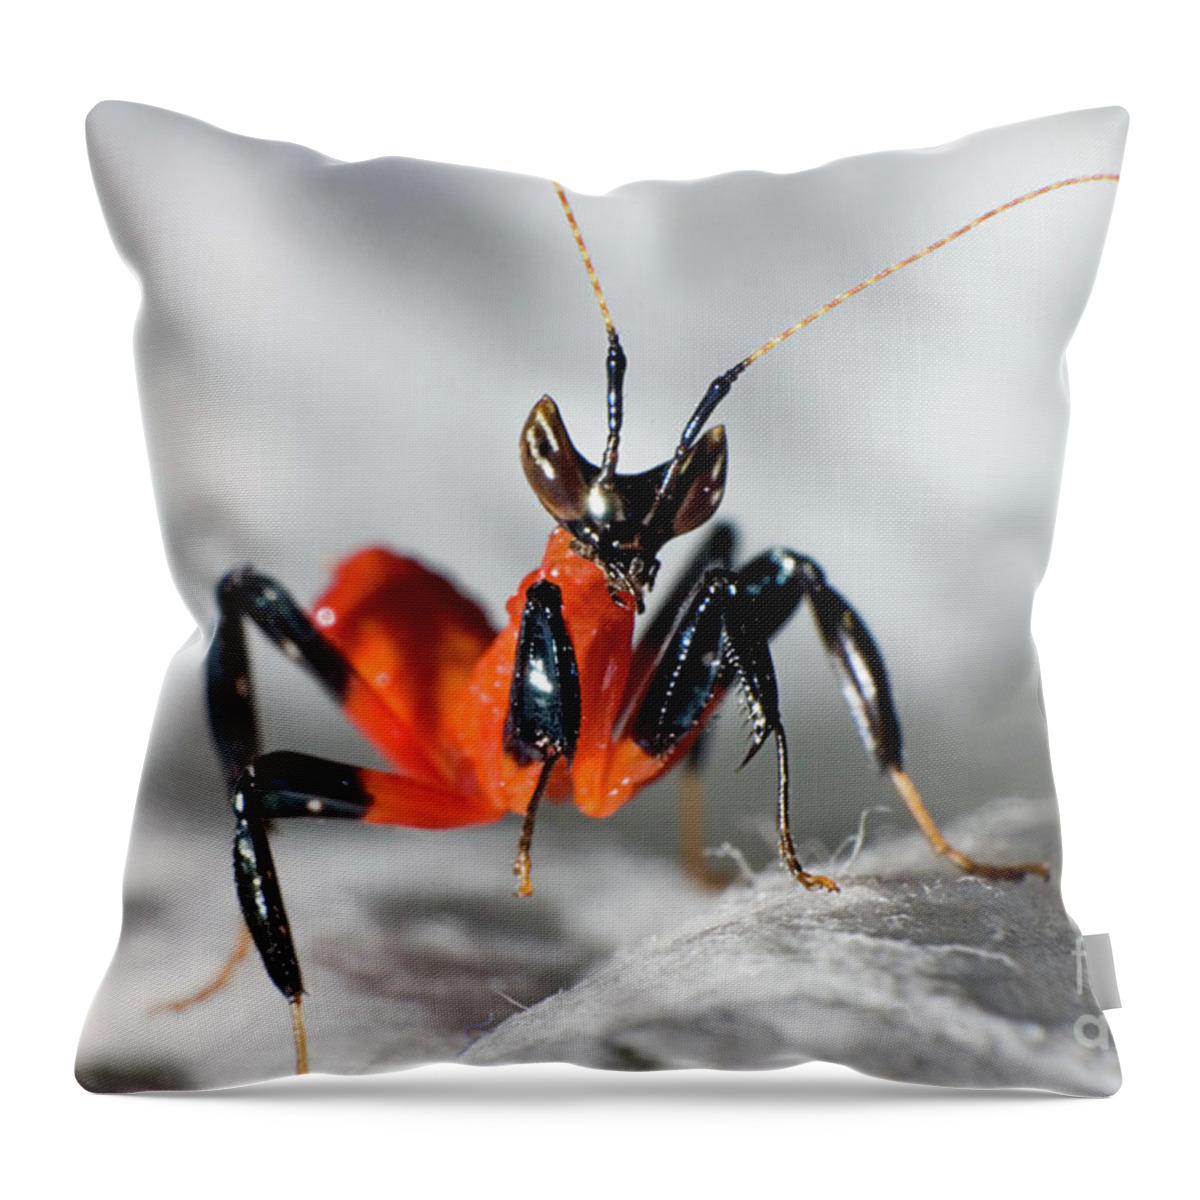 Animals Throw Pillow featuring the photograph Baby Orchid Praying Mantis by Joerg Lingnau